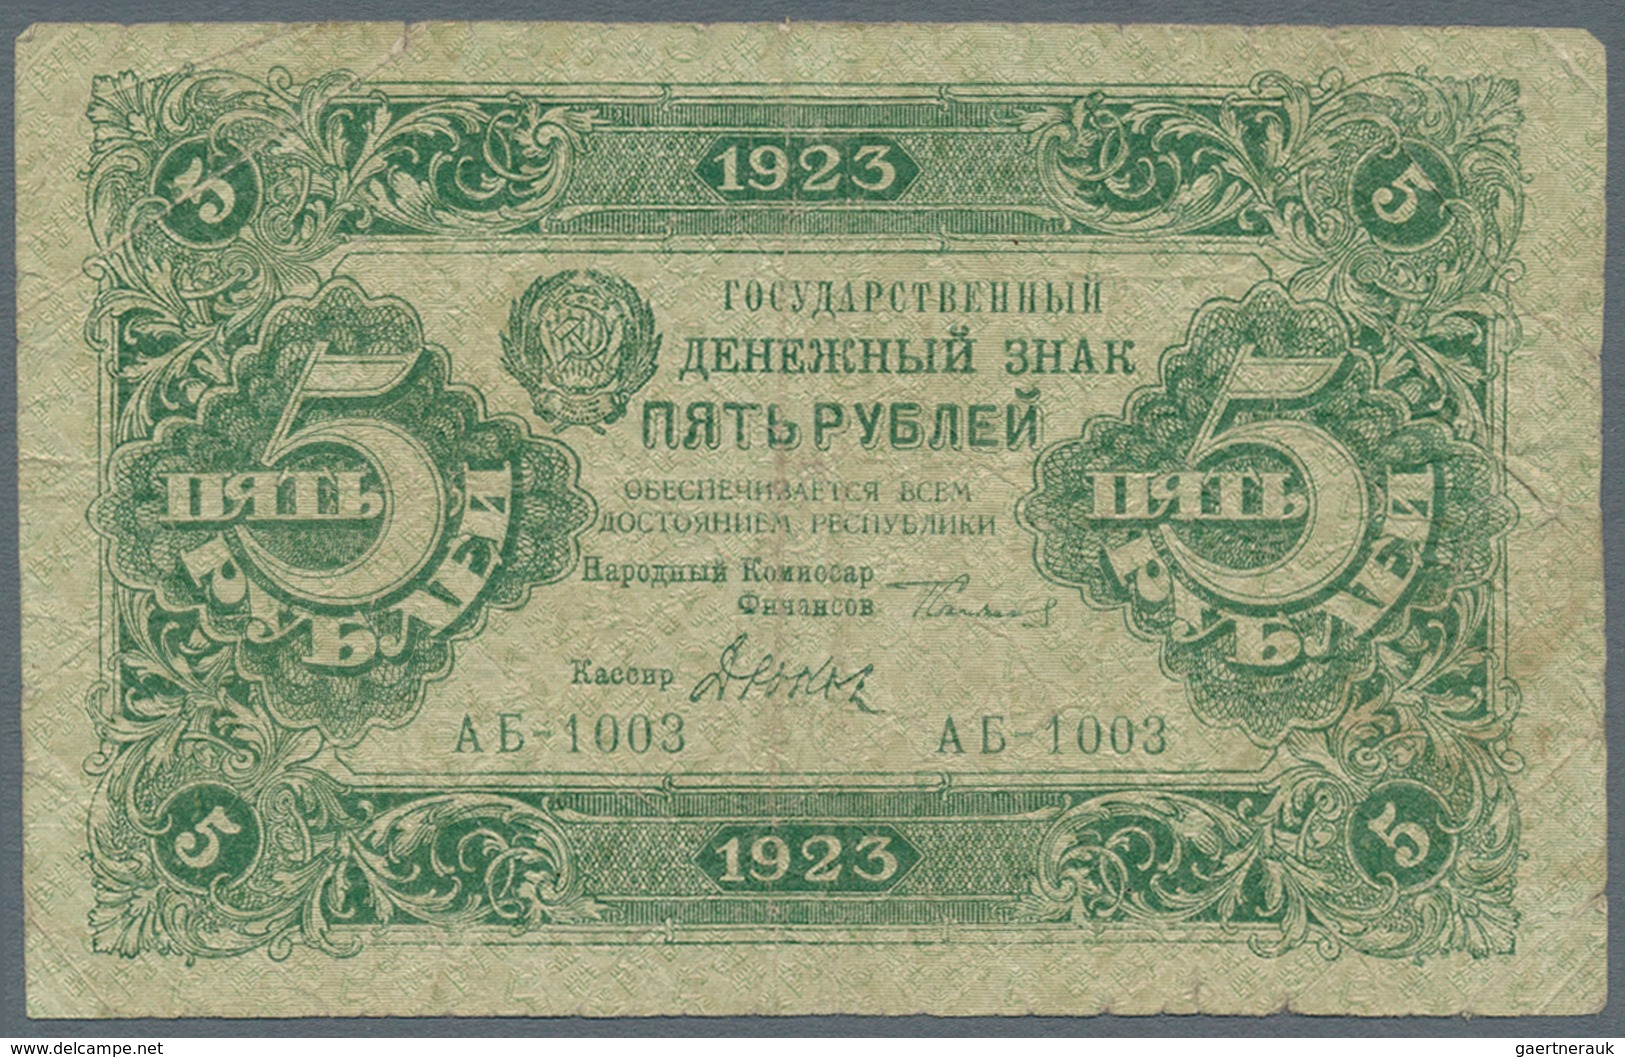 Russia / Russland: Very interesting lot with 41 Banknotes State issues 1915 till 1947, comprising fo